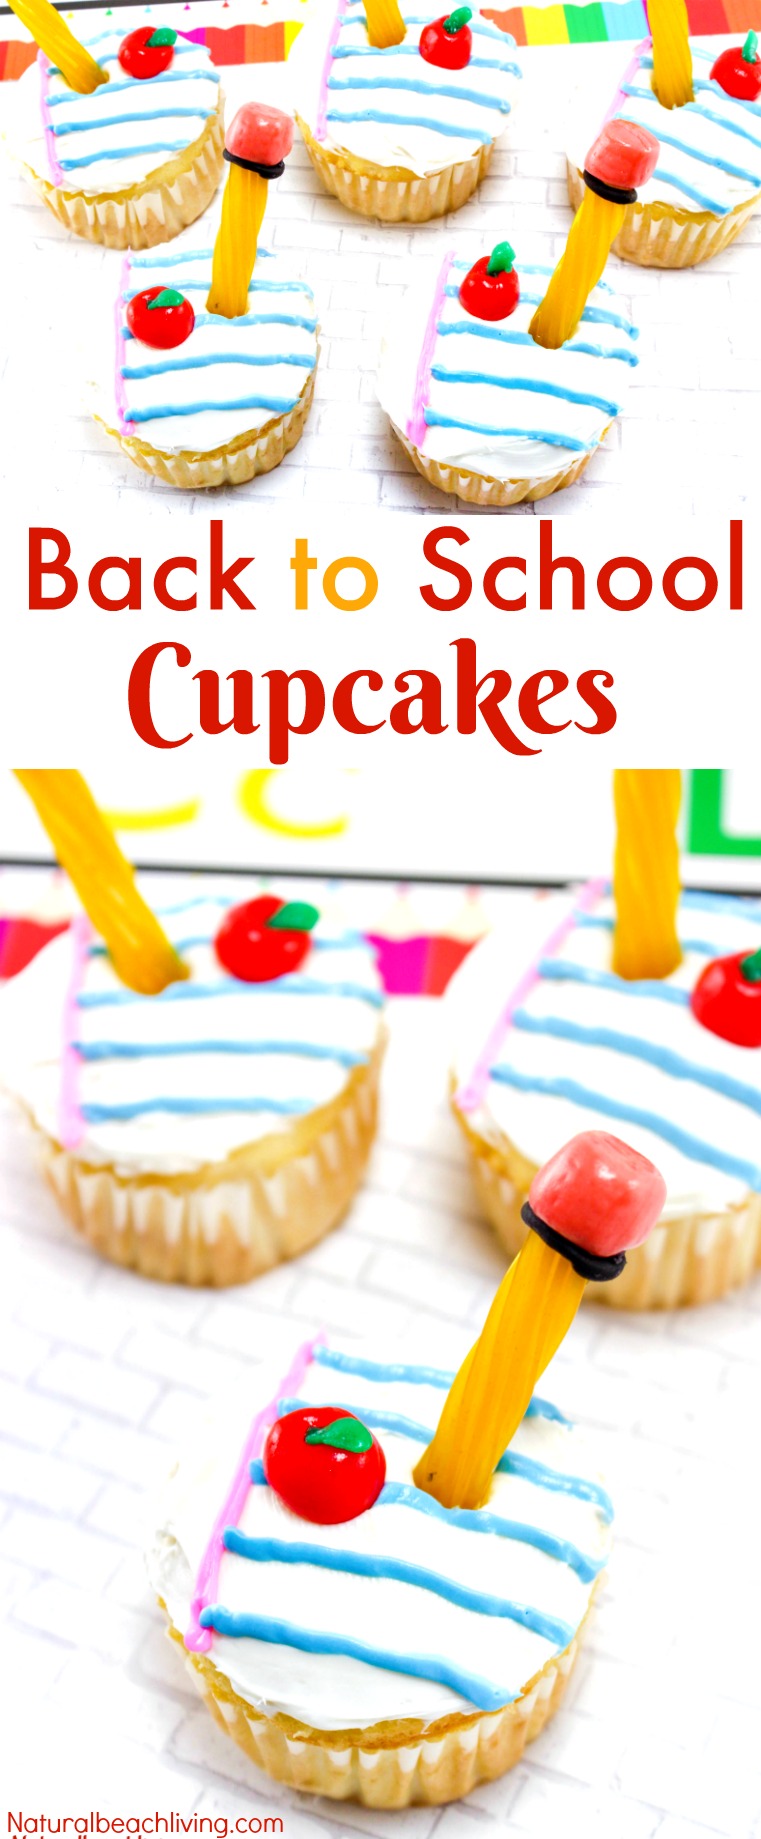 Back to School Cupcakes, These School Party Cupcakes are perfect for Back to School Party ideas or School Party Food, Take these for Bake Sale Cupcakes because they are easy cupcakes to make and a fun School Supplies Dessert for Kids, Yum!